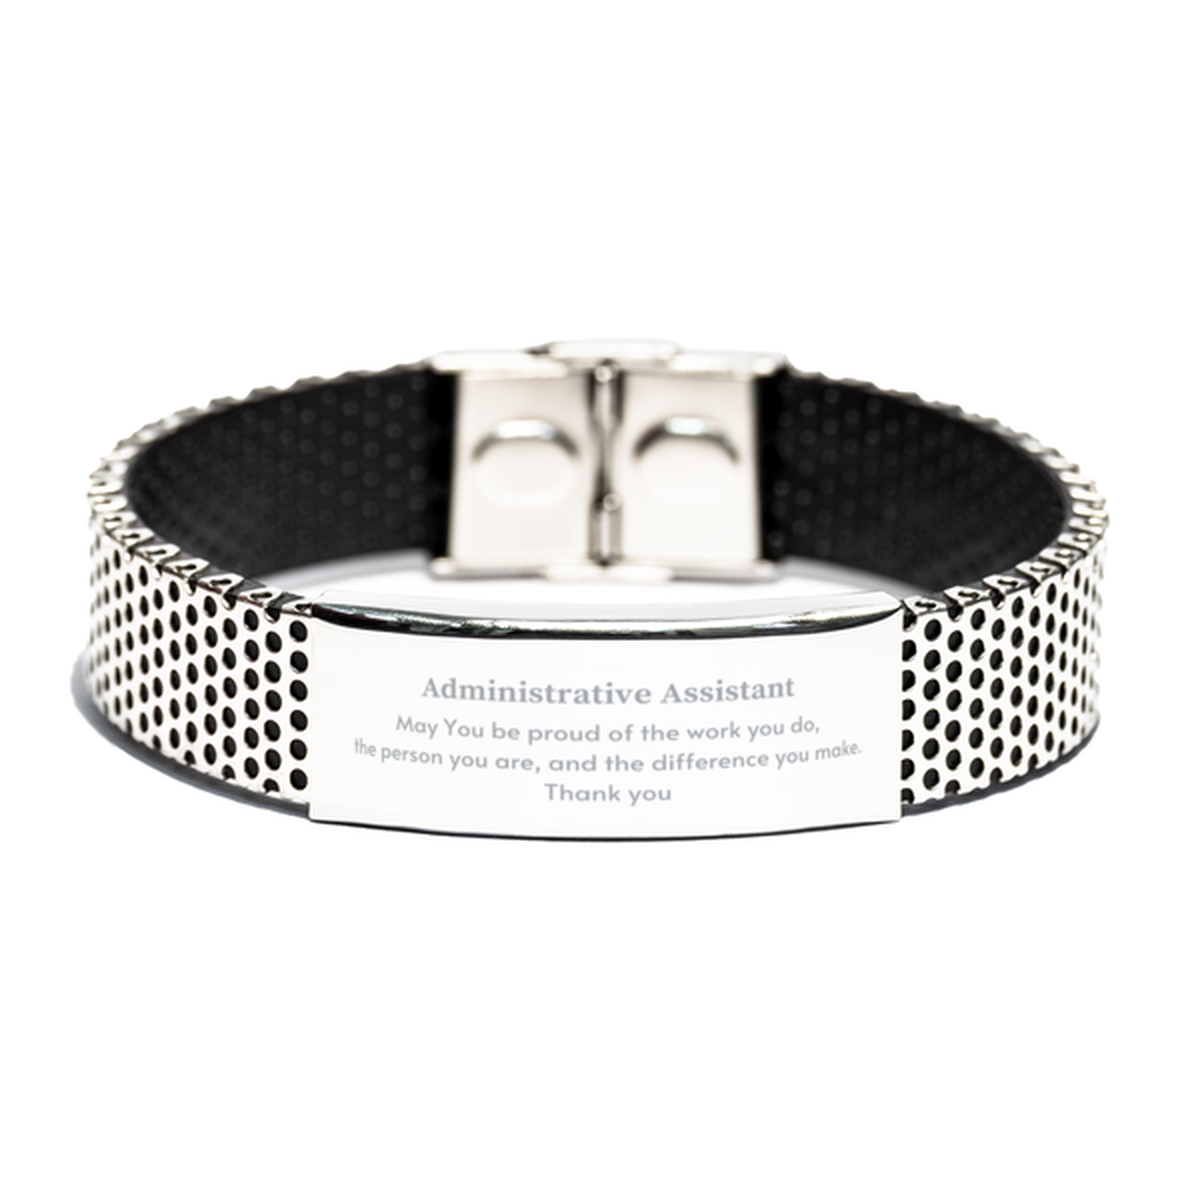 Heartwarming Stainless Steel Bracelet Retirement Coworkers Gifts for Administrative Assistant, Administrative Assistant May You be proud of the work you do, the person you are Gifts for Boss Men Women Friends